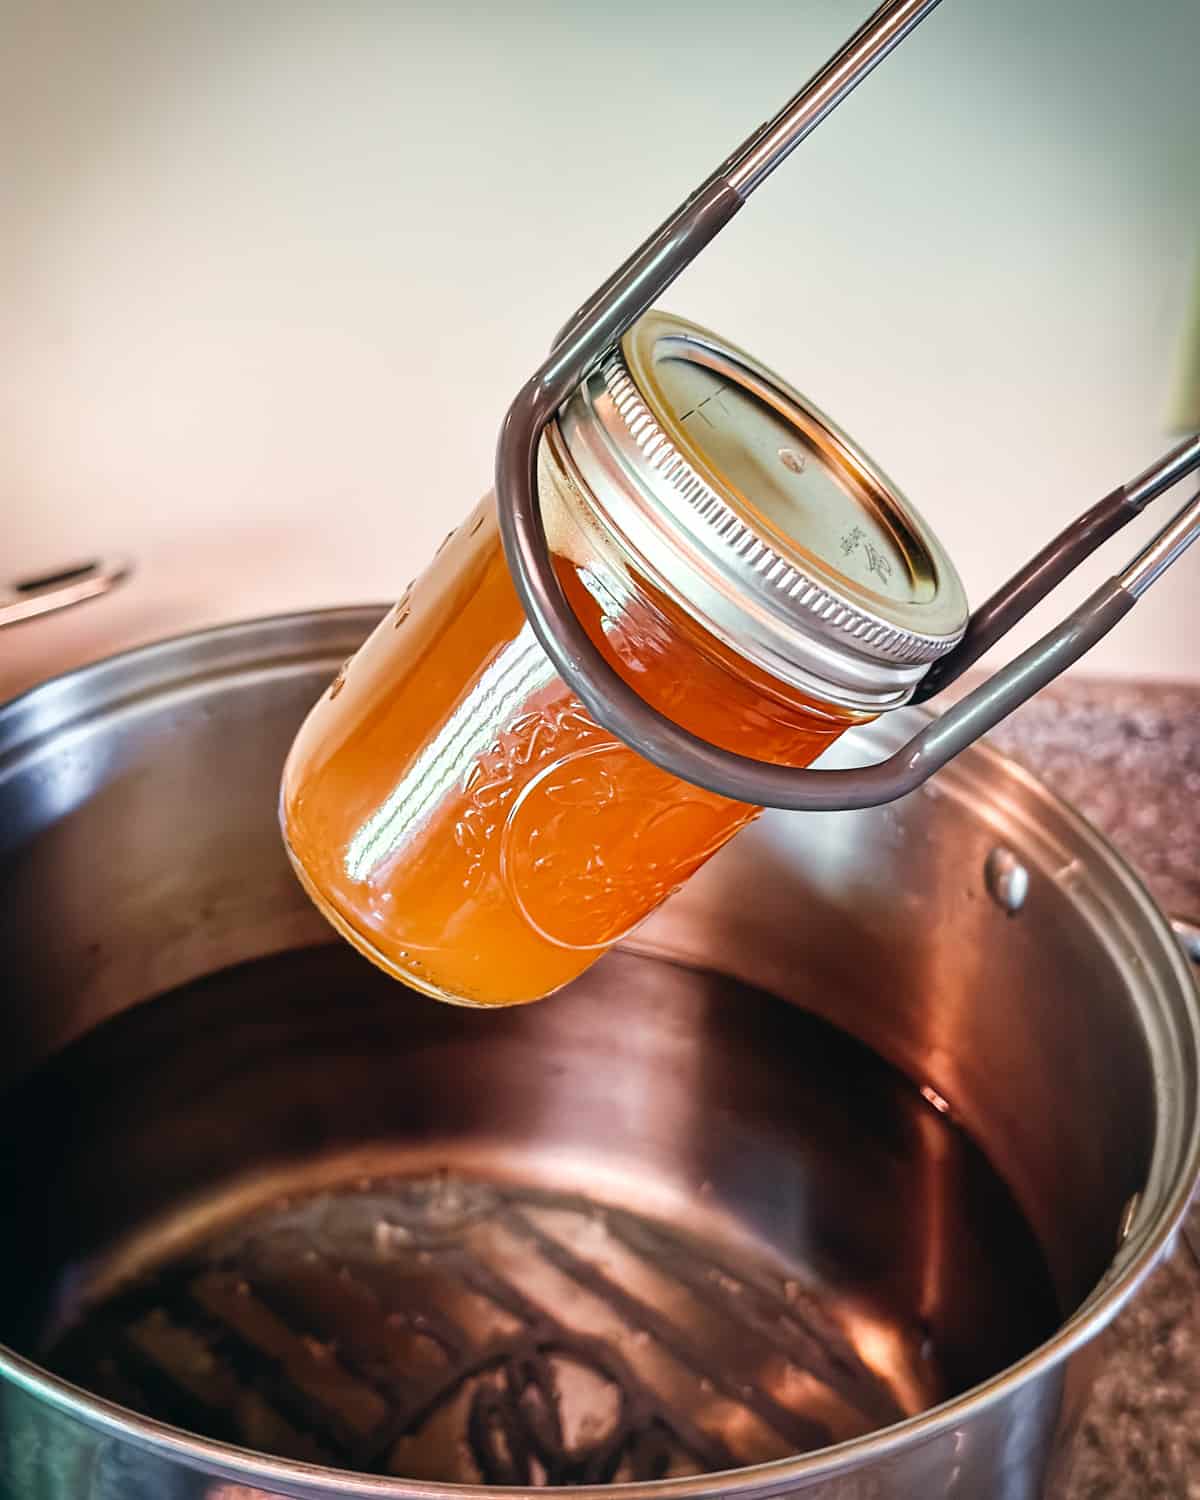 A jar lifter pulling a jar of dandelion jelly out of a pot of boiling water to process for canning.